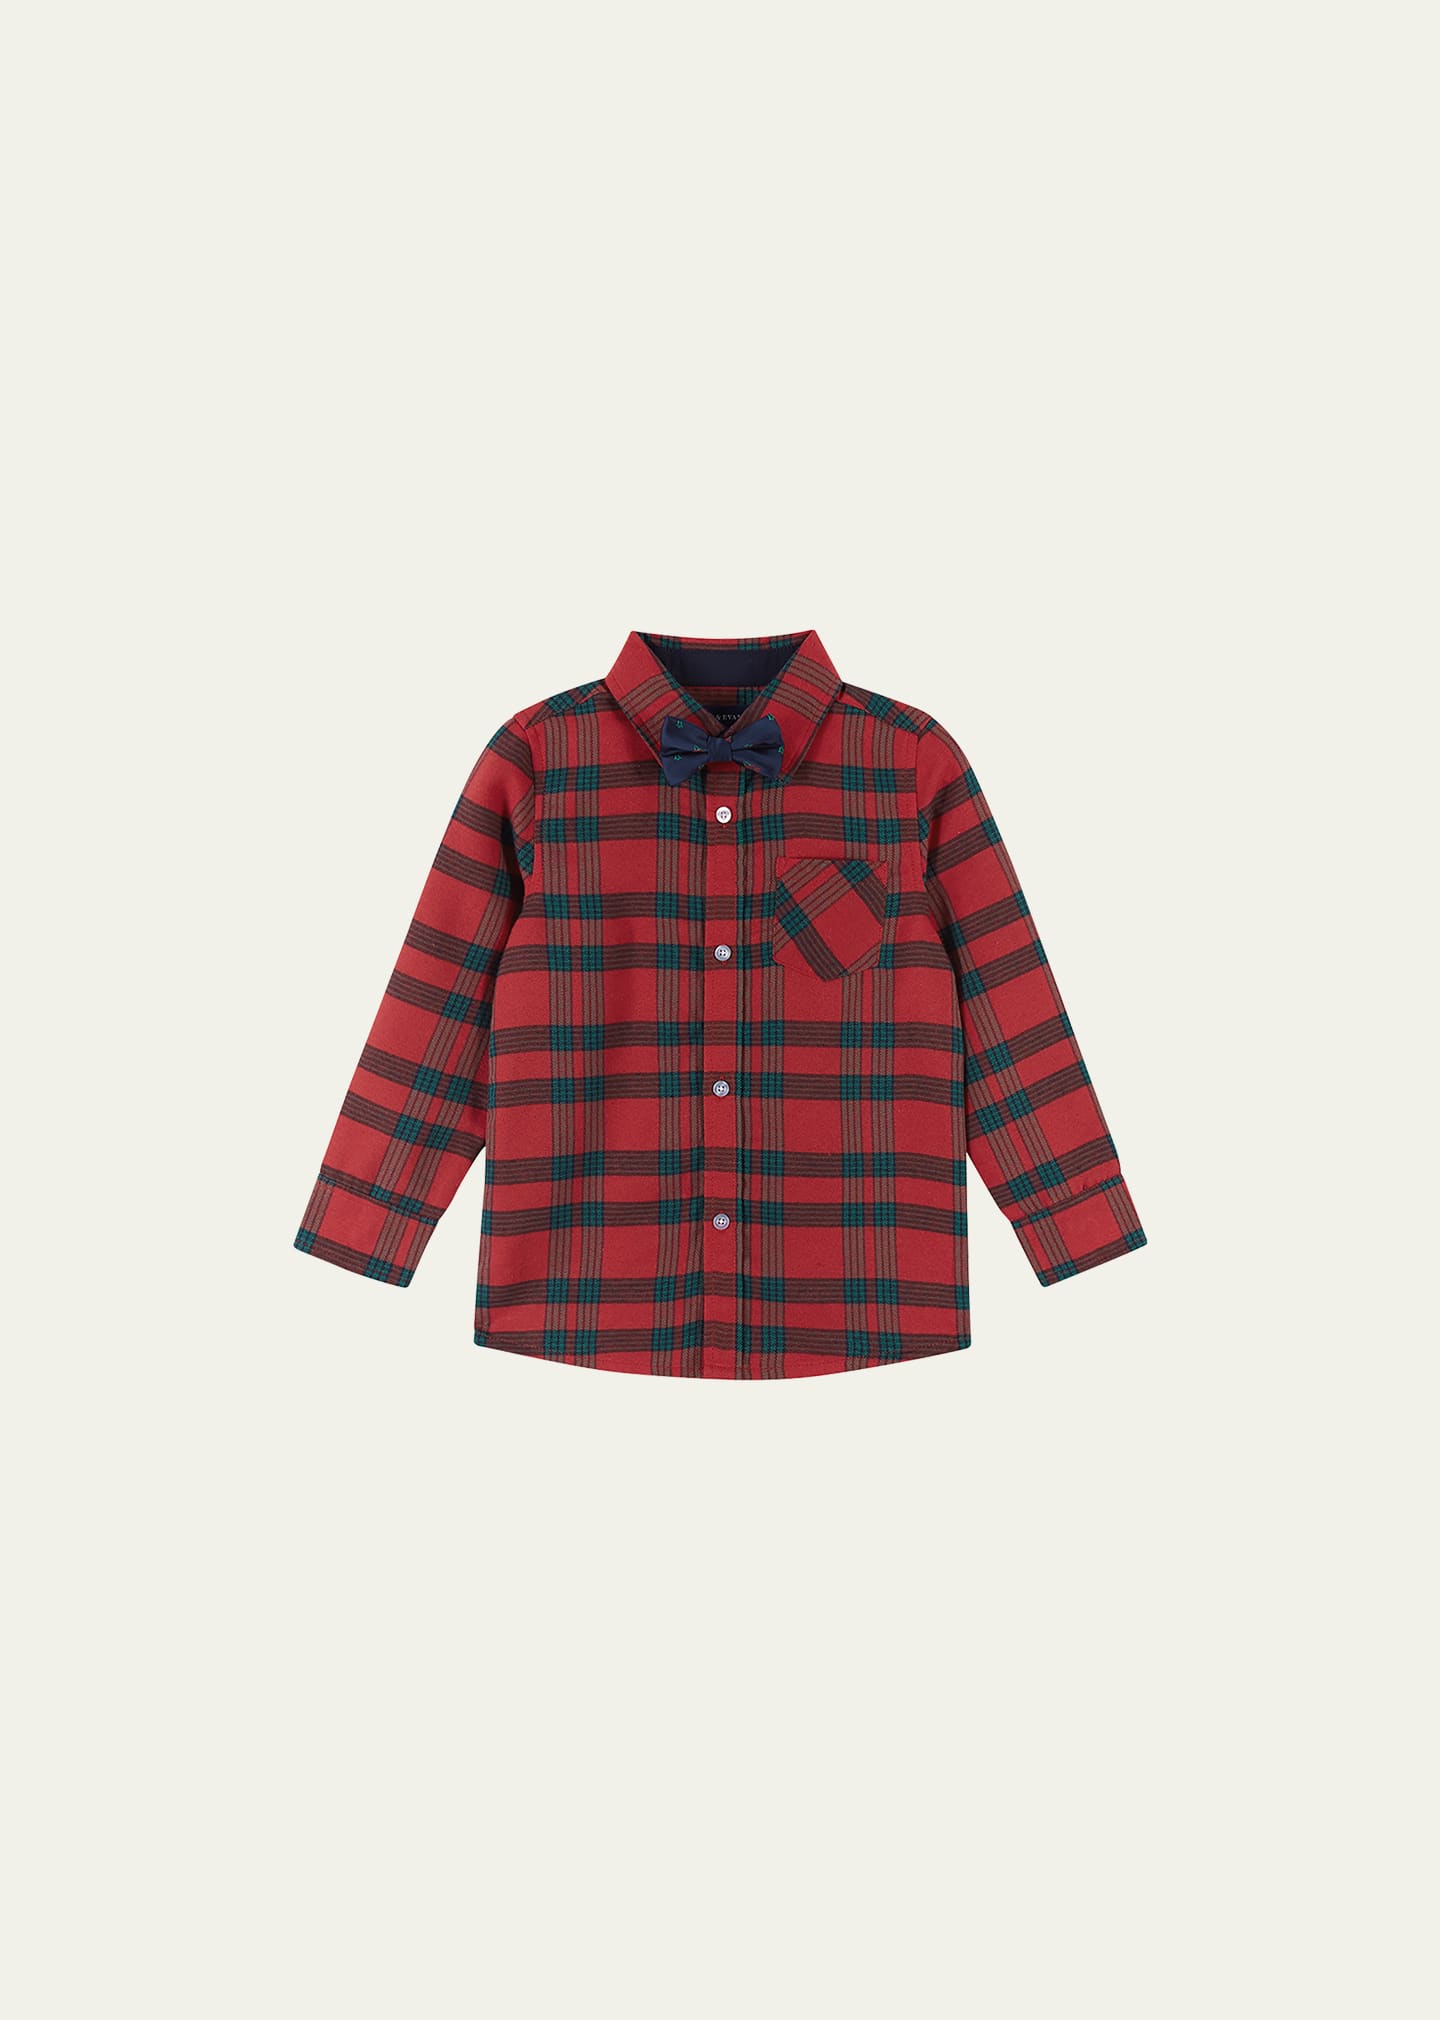 Shop Andy & Evan Boy's Holiday Flannel Button Down W/ Bowtie In Red Plaid